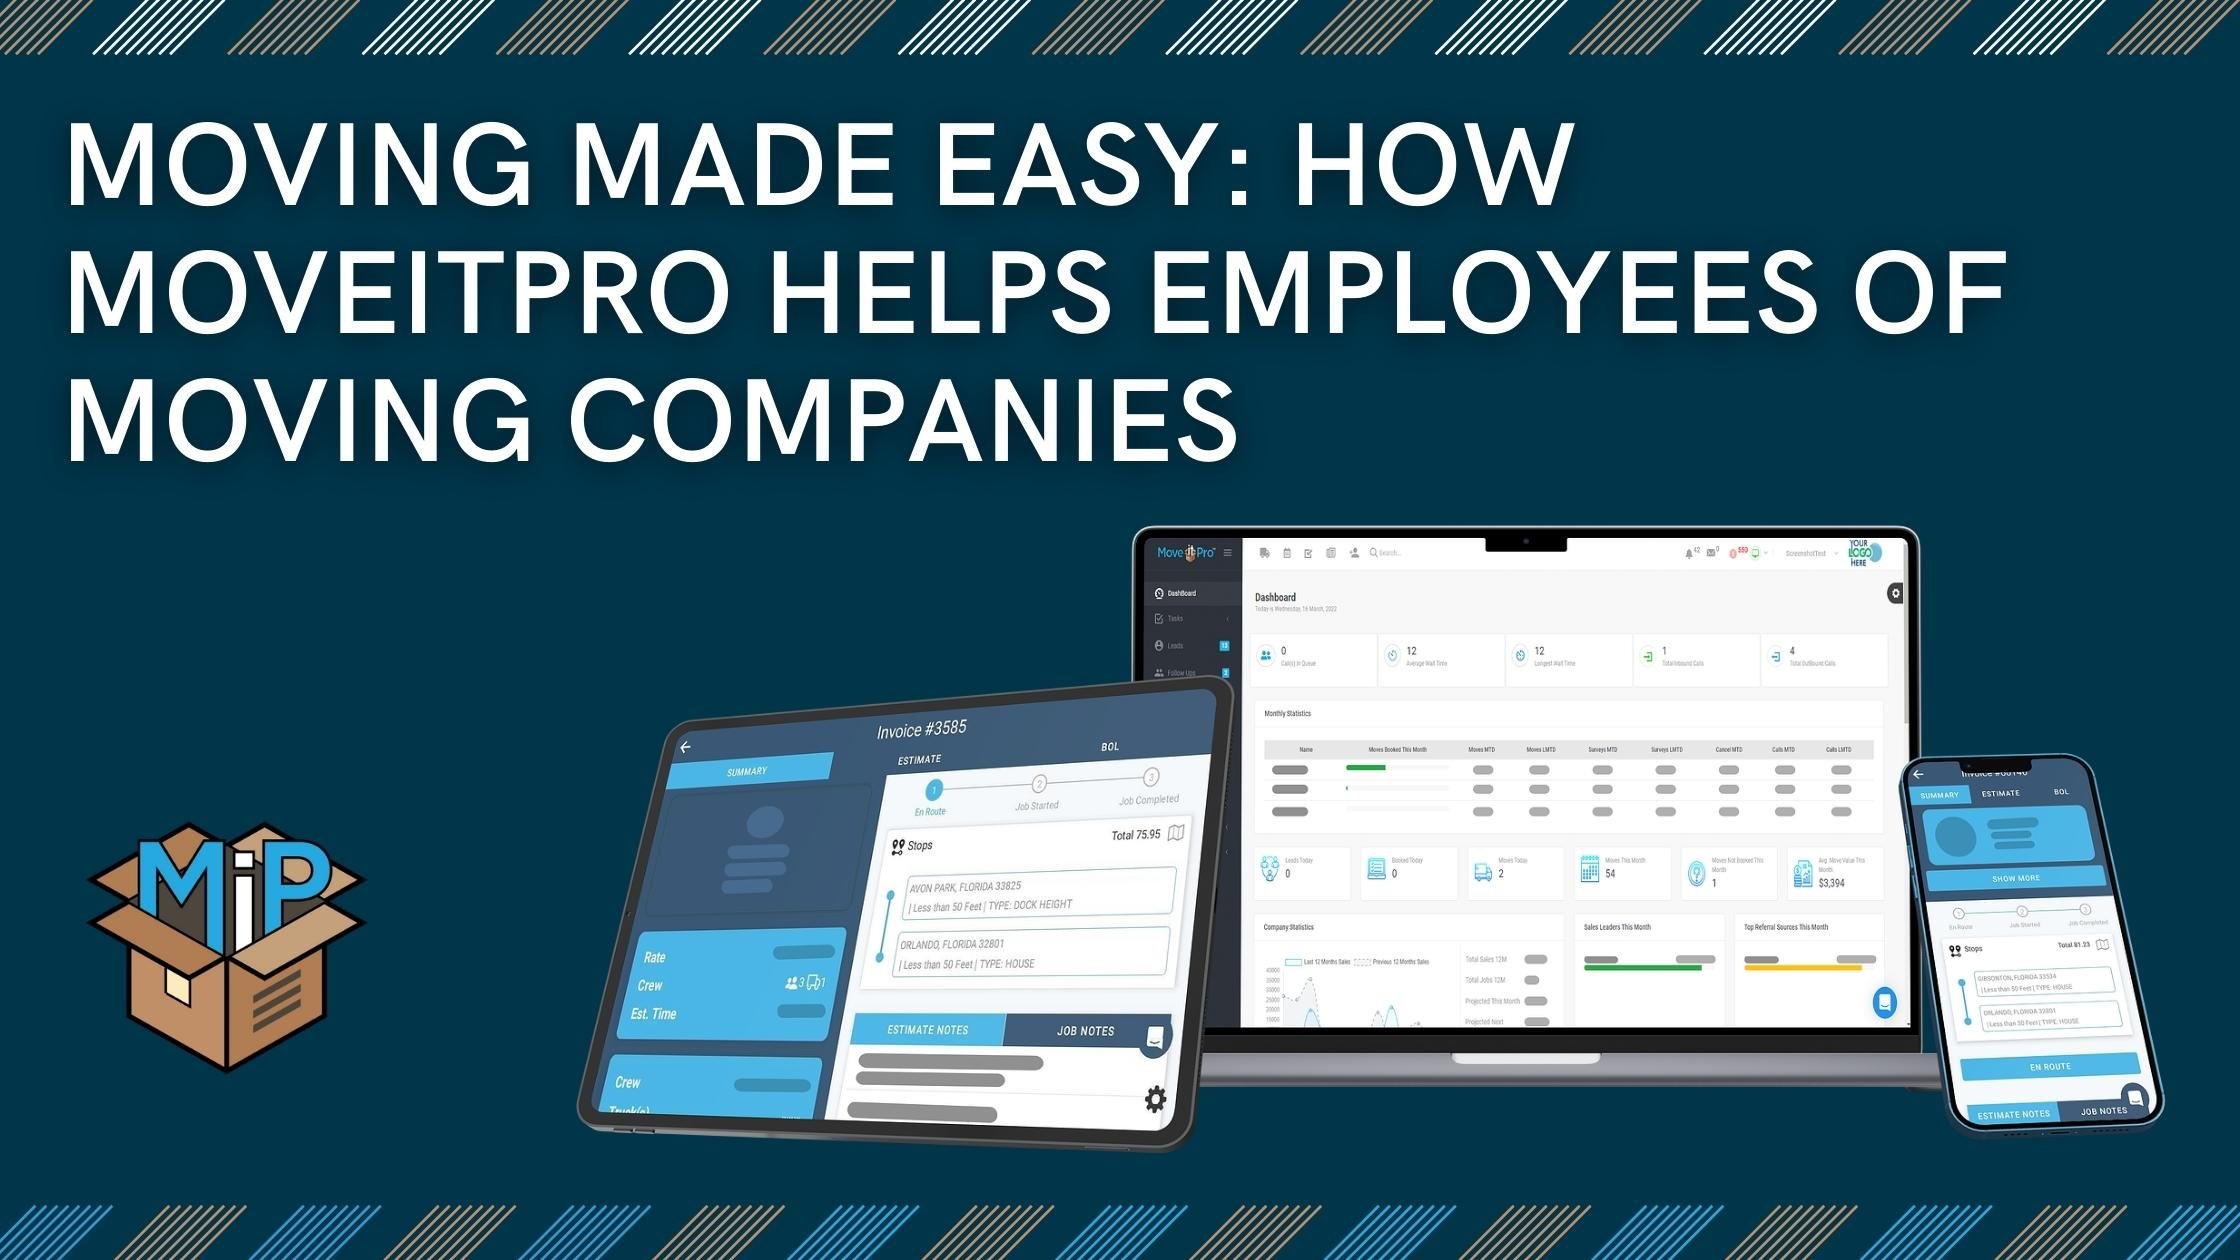 Moving Made Easy: How MoveitPro Helps Employees of Moving Companies